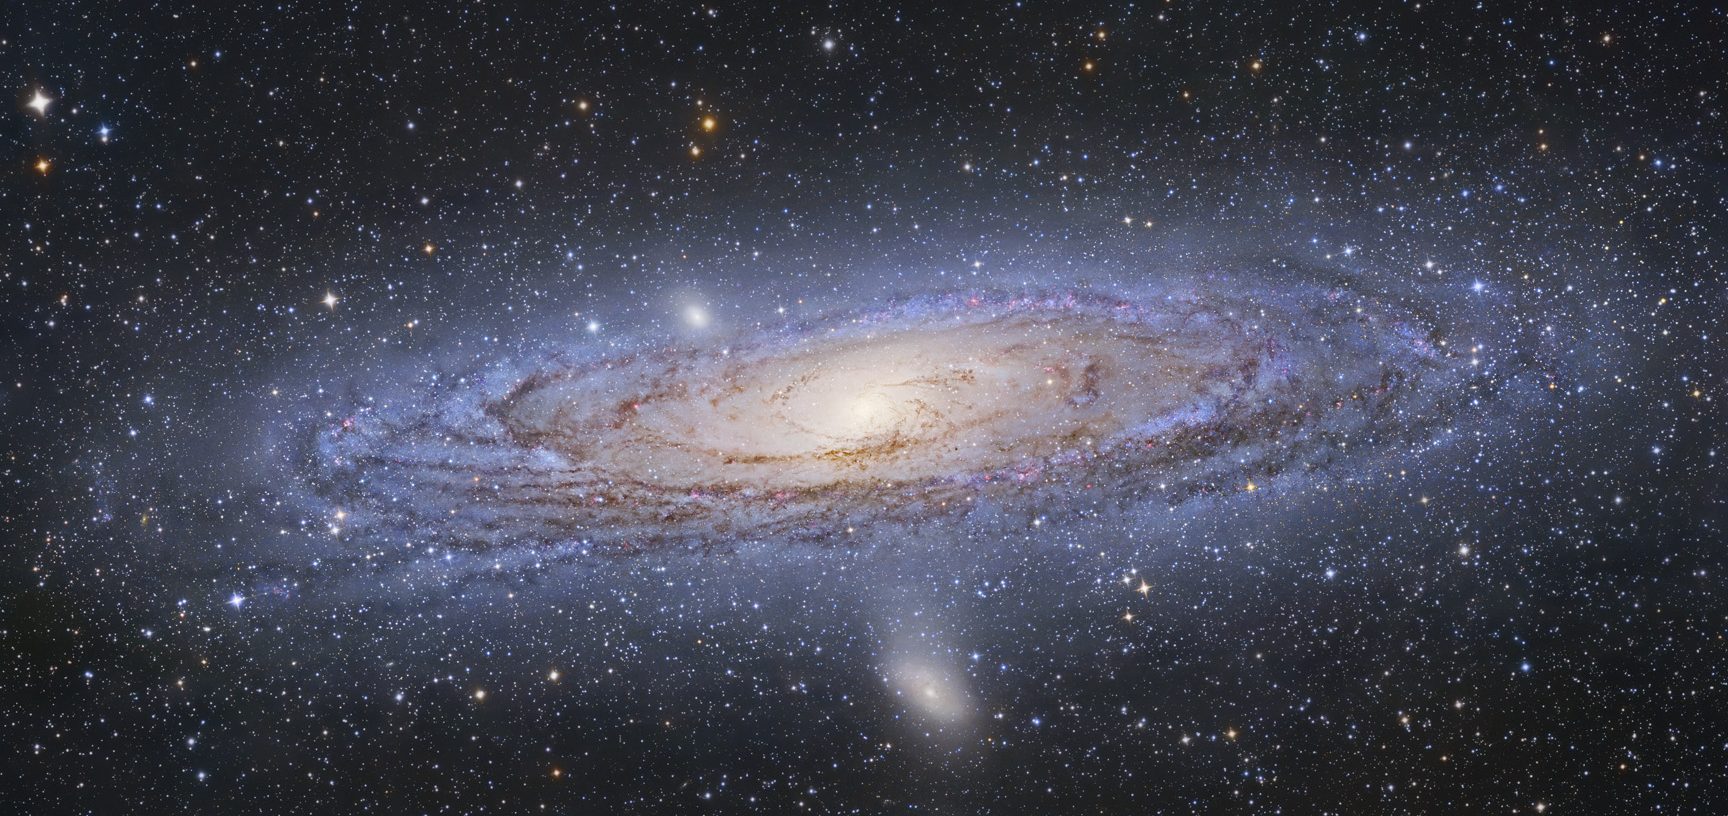 Andromeda Galaxy mosaic pieced together from views using a large telescope.